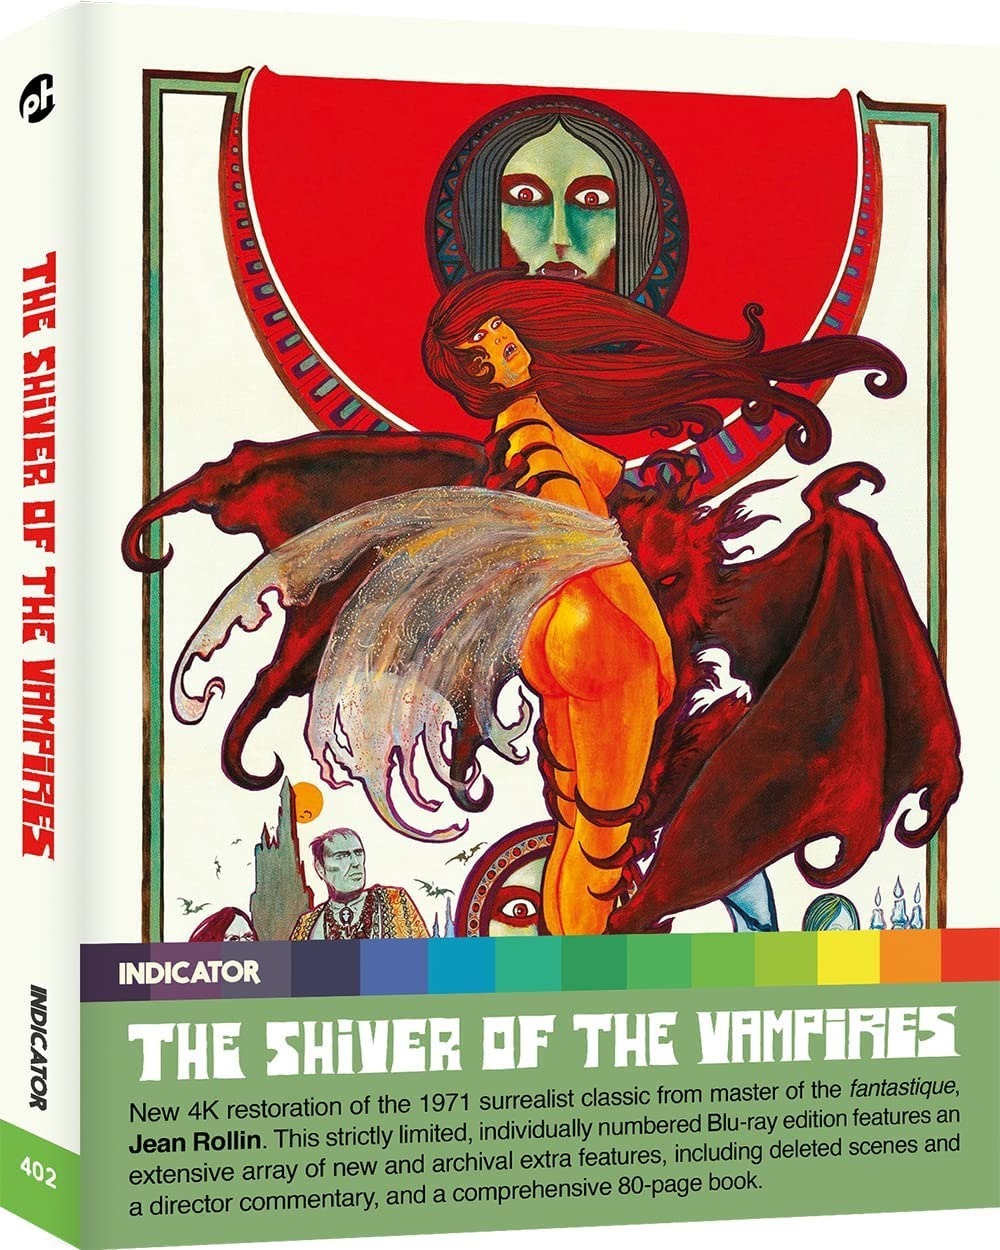 The Shiver of the Vampires (1971) de Jean Rollin - front cover